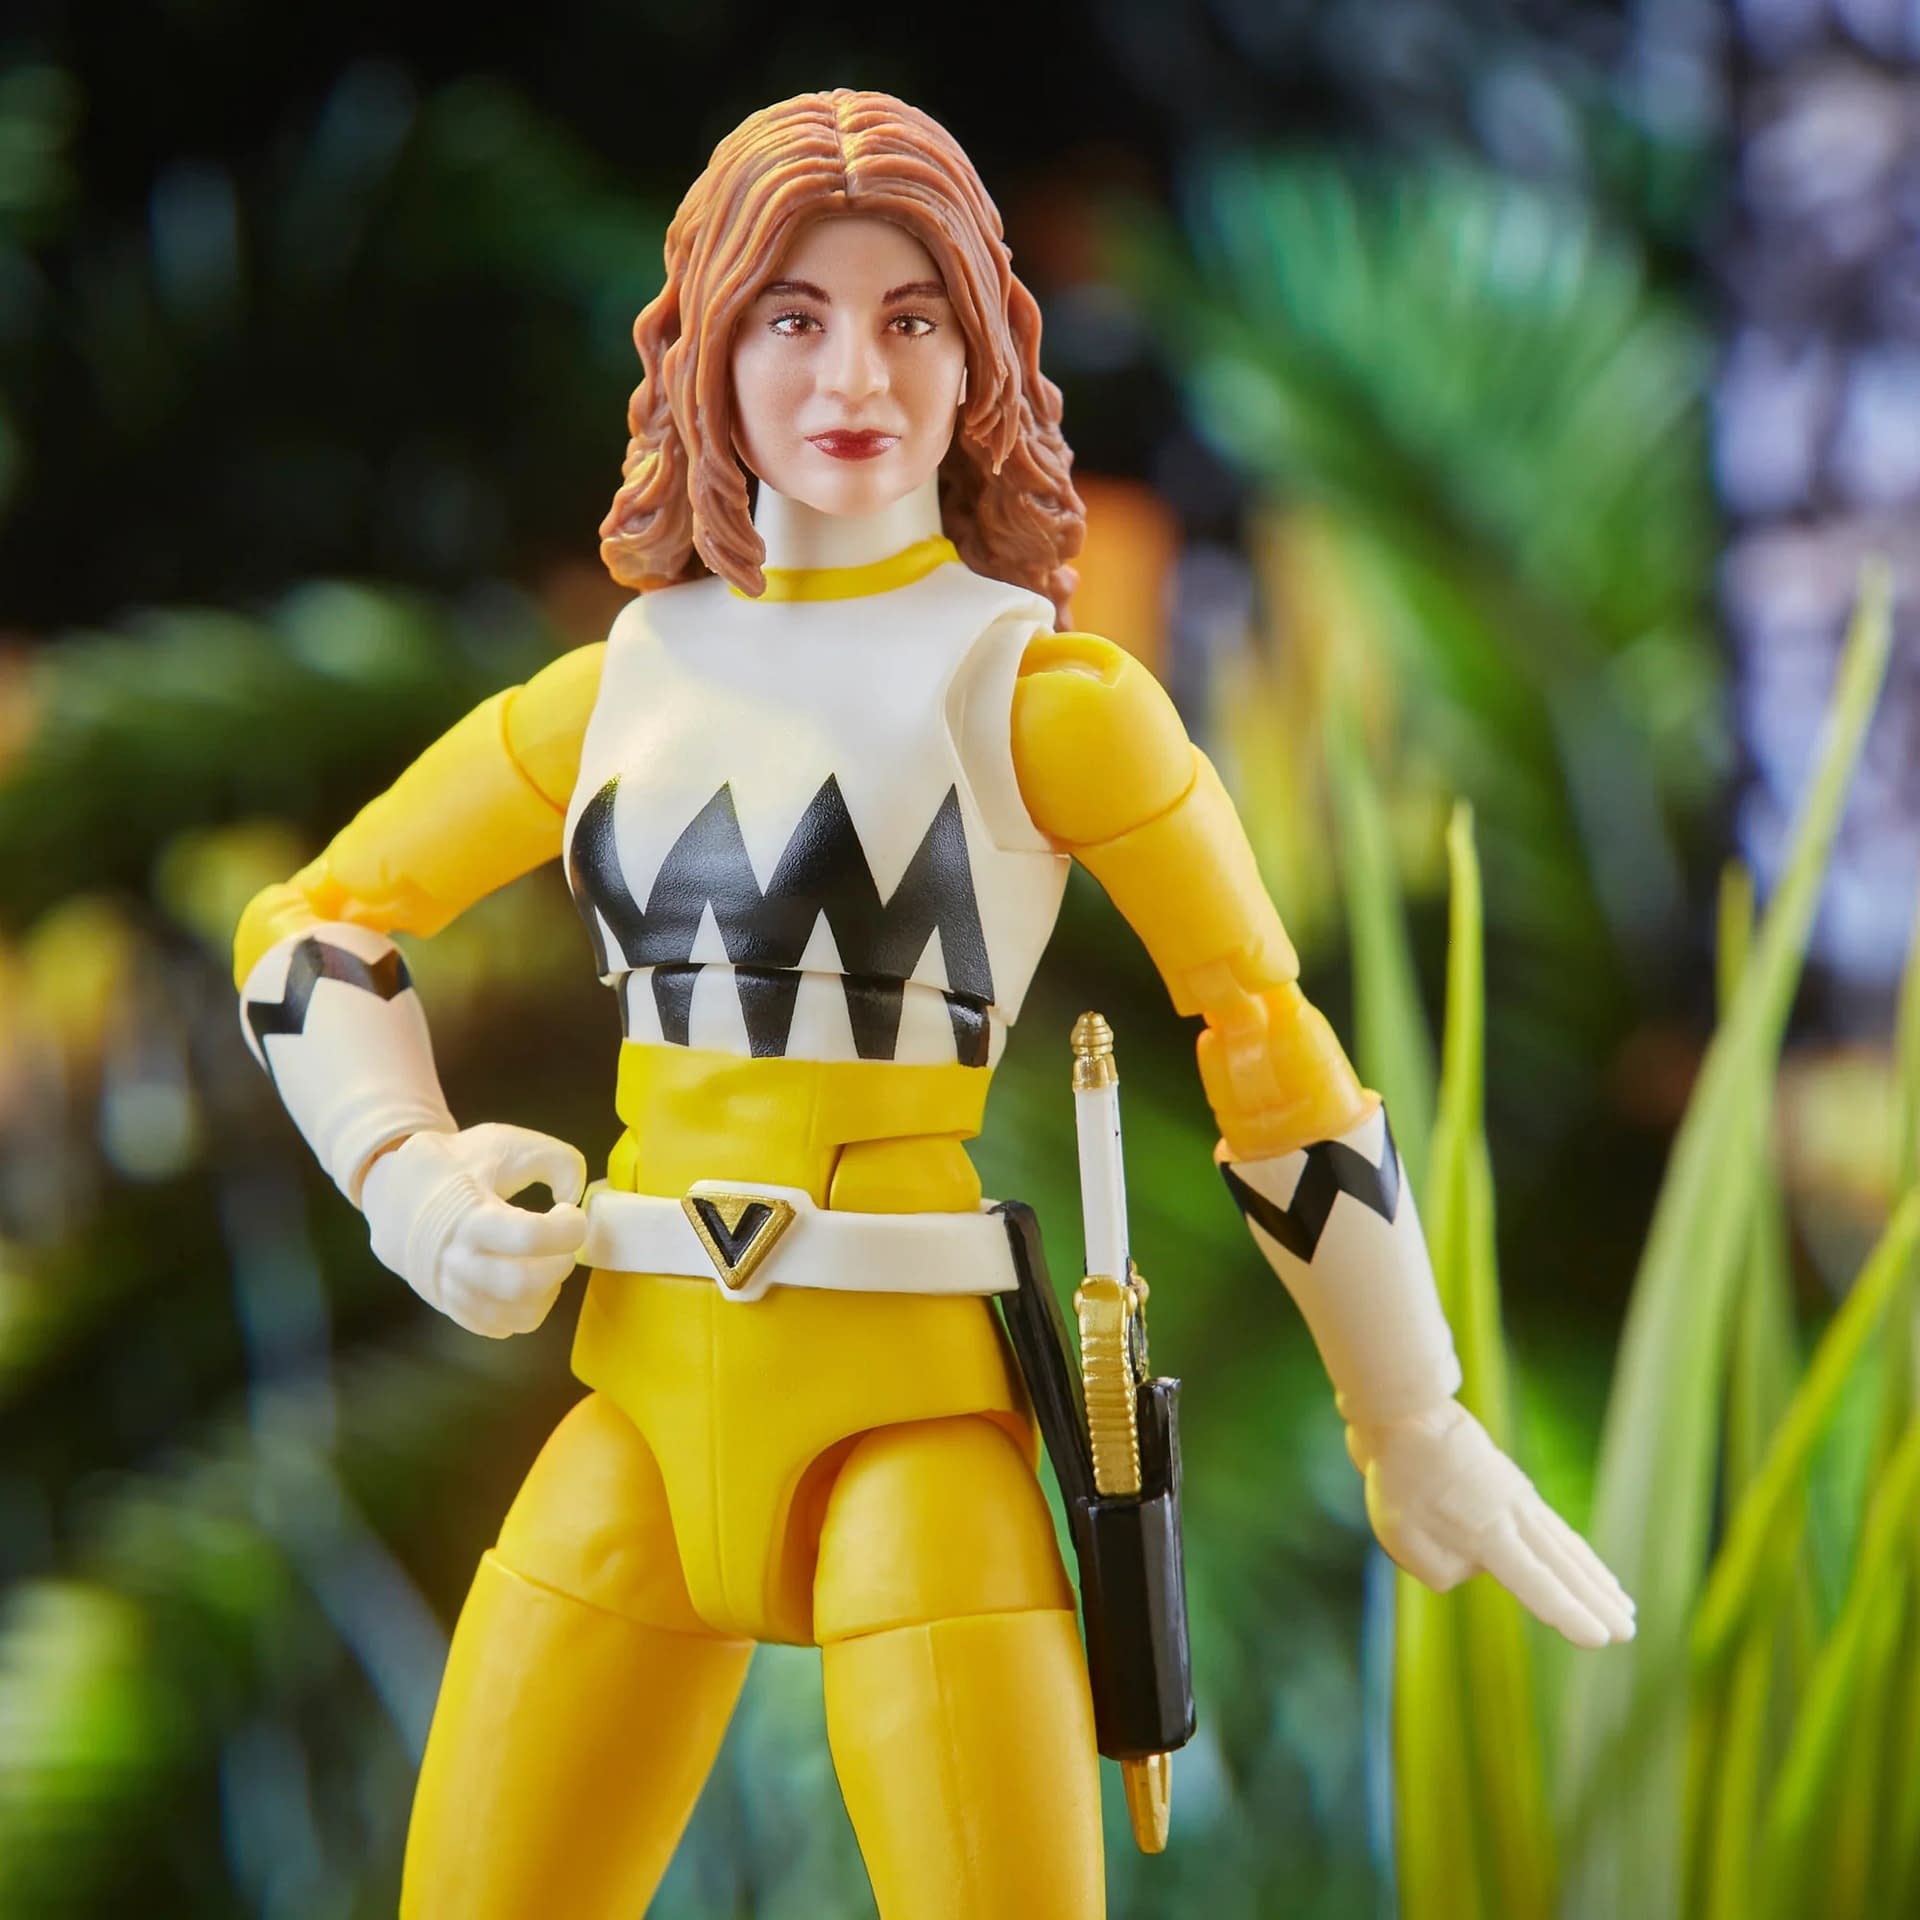 Power Rangers Lost Galaxy Yellow Rangers Ready for Action with Hasbro 